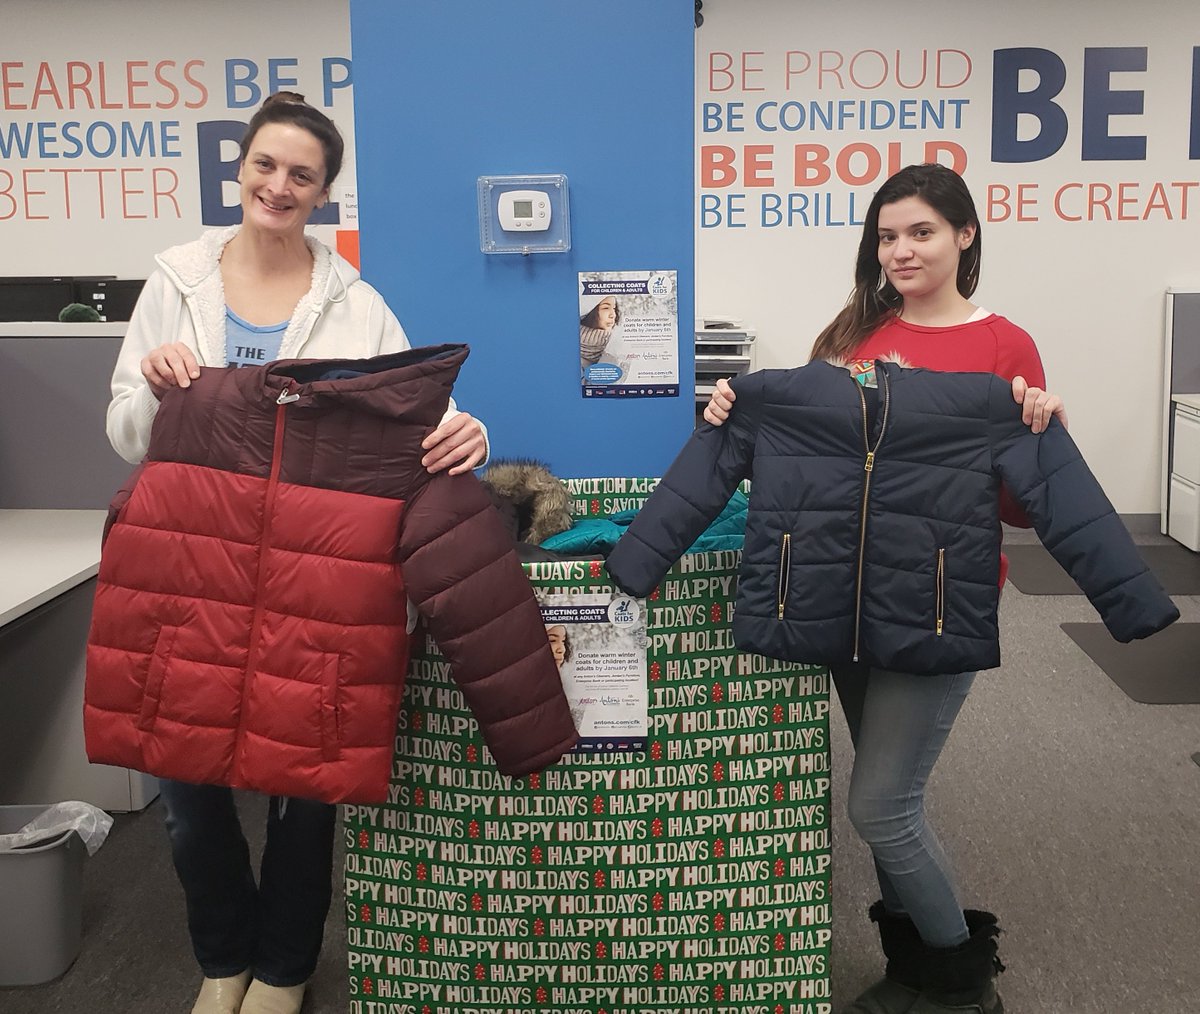 Caring Partners’ Coats For Kids Collects Winter Coats from October 15, 2018 – January 6, 2019 at all Anton’s Cleaners, Jordan’s Furniture and Enterprise Bank locations